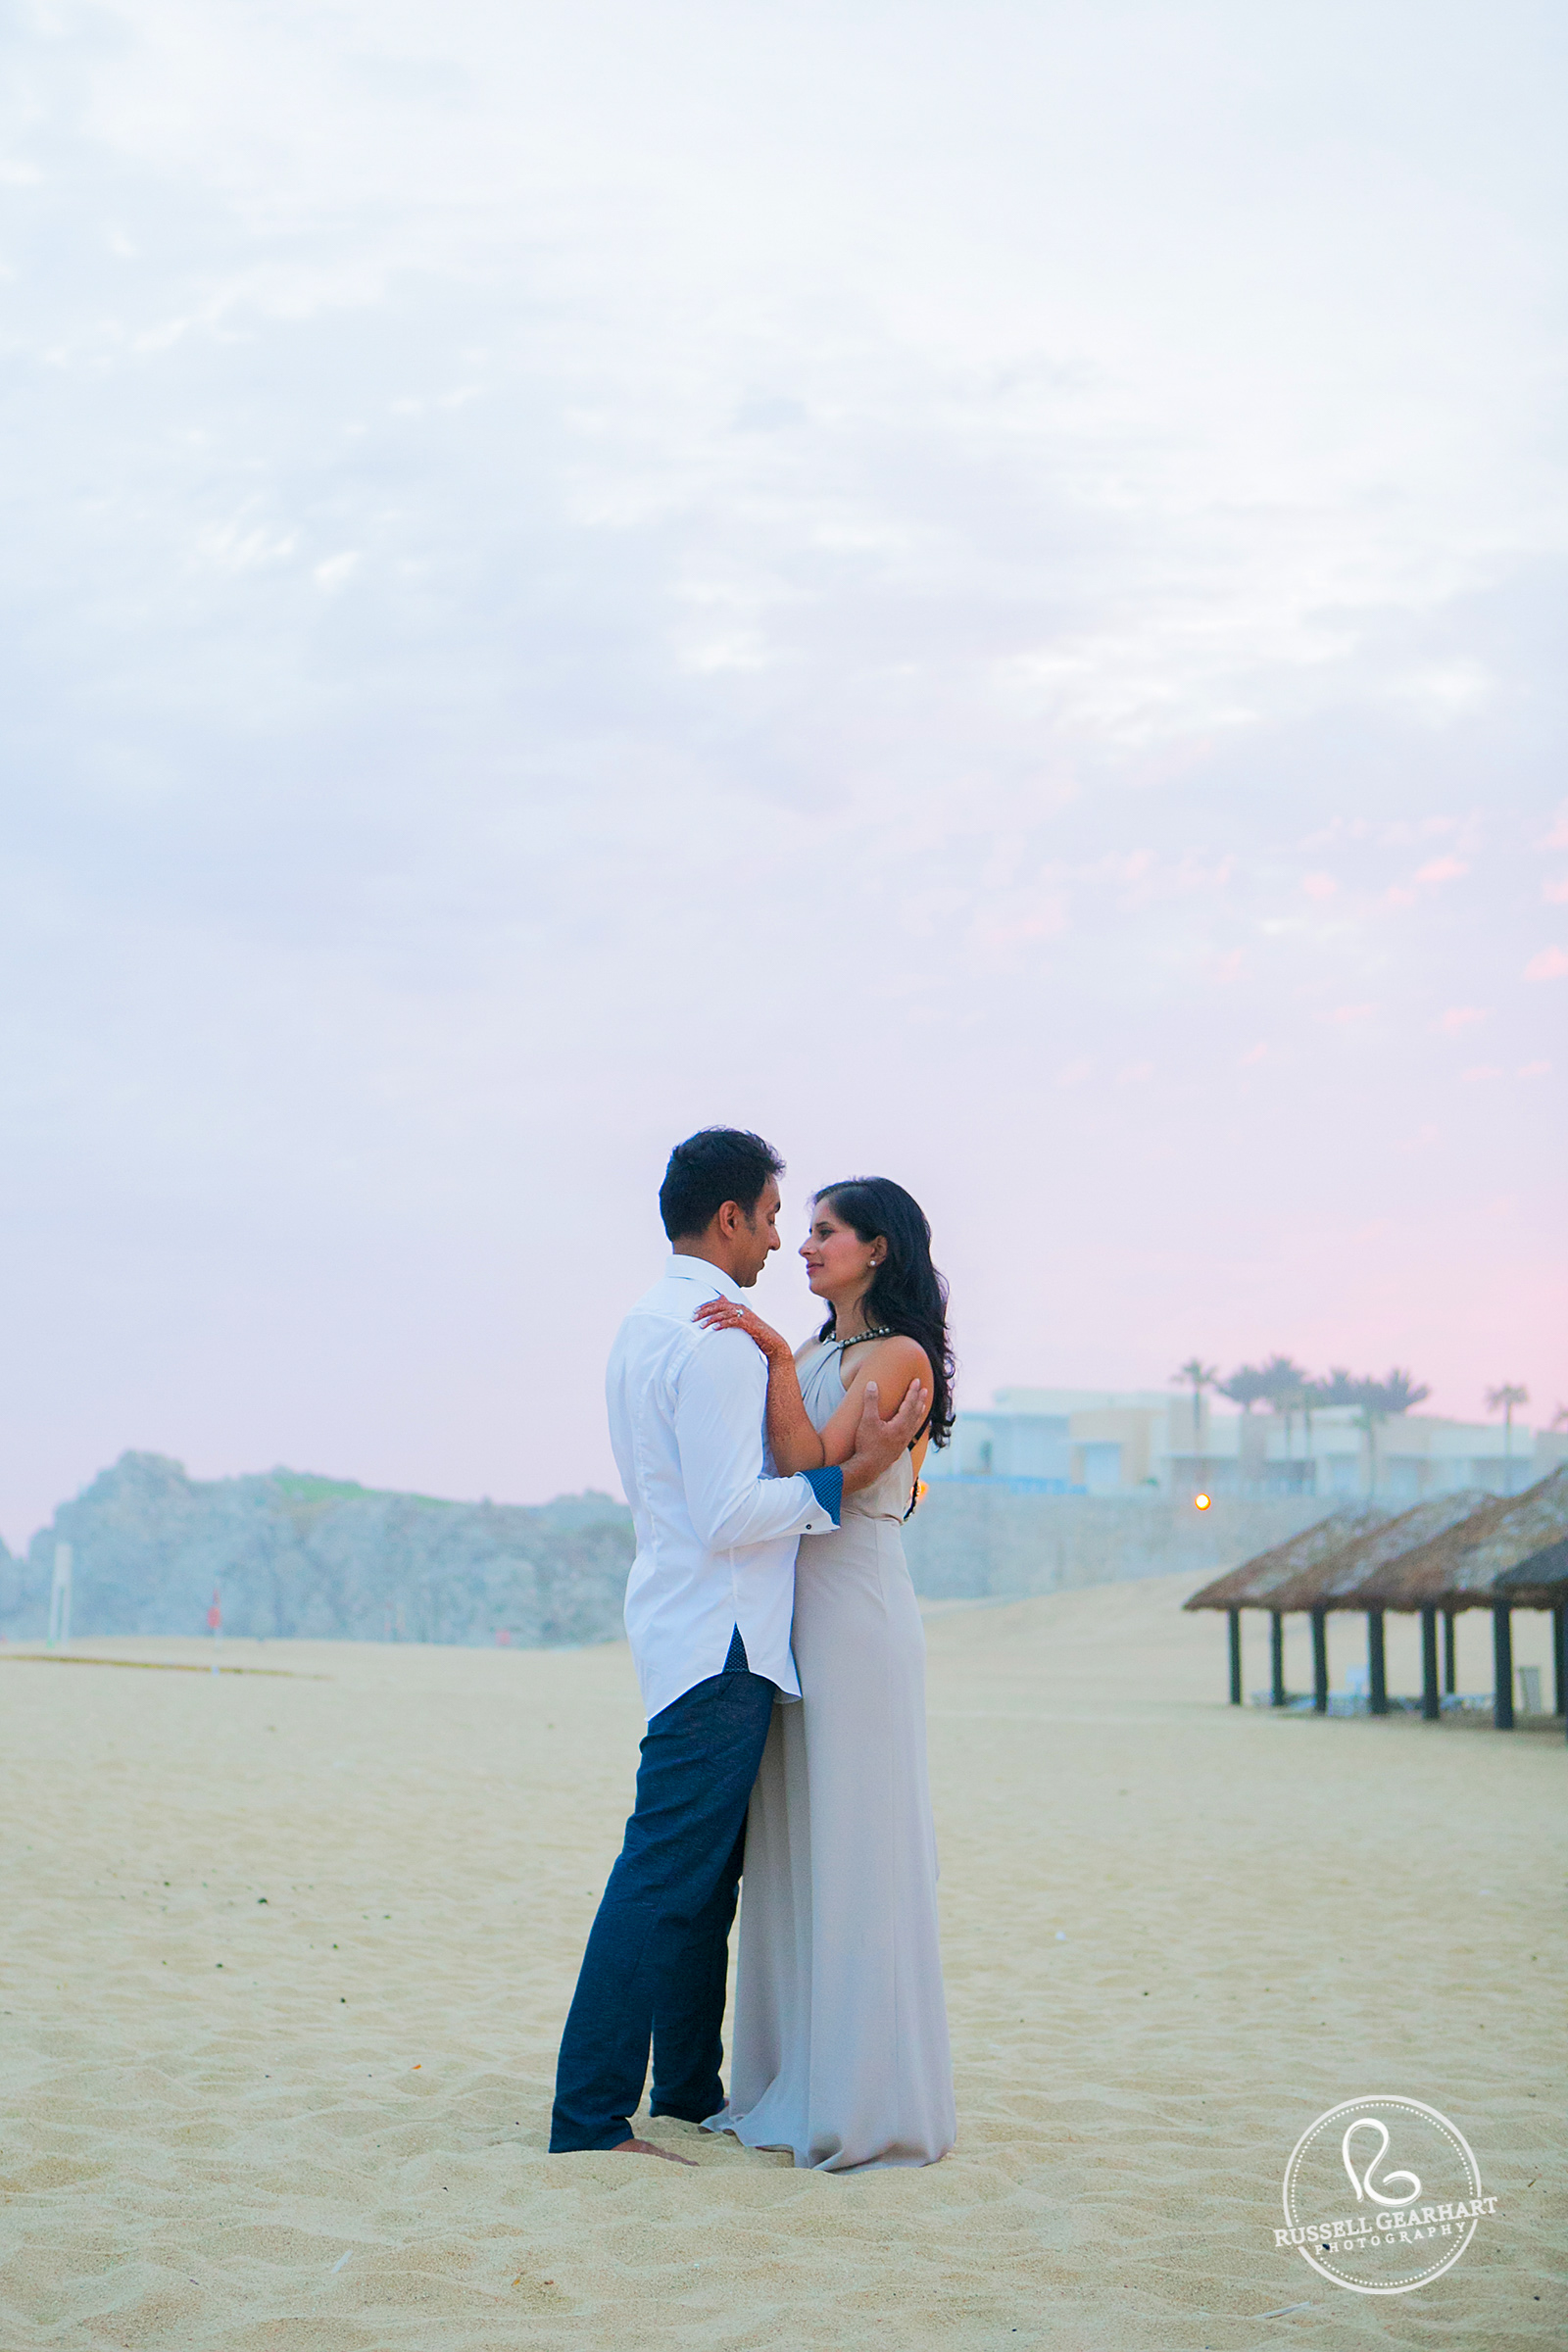 Cabo San Lucas Beach Portraits – Russell Gearhart Photography – www.gearhartphoto.com